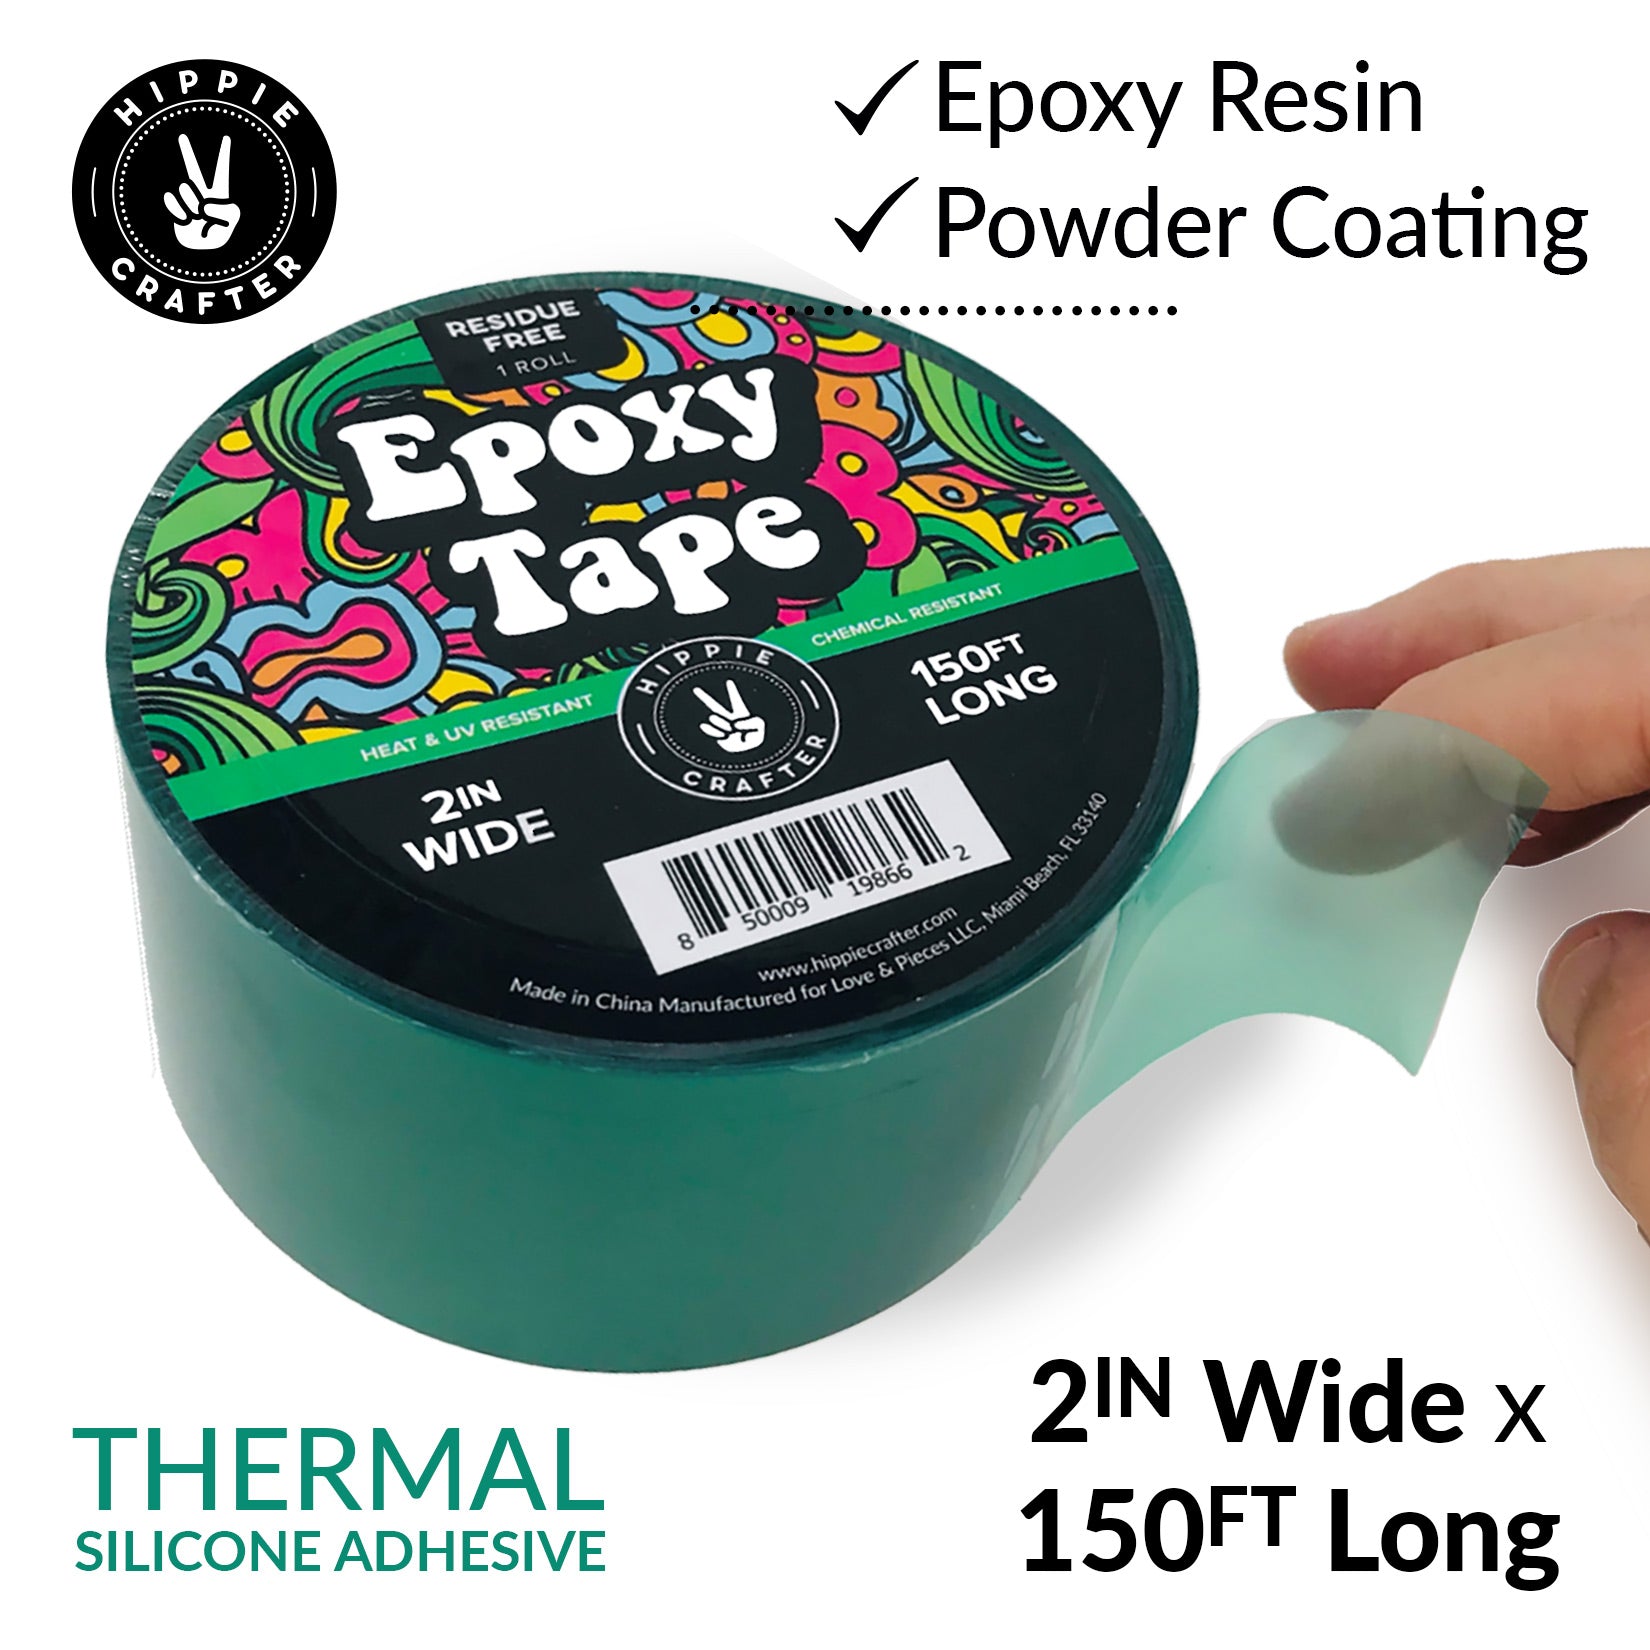 Resist Tape - Color Pour Resin - American Crafts*